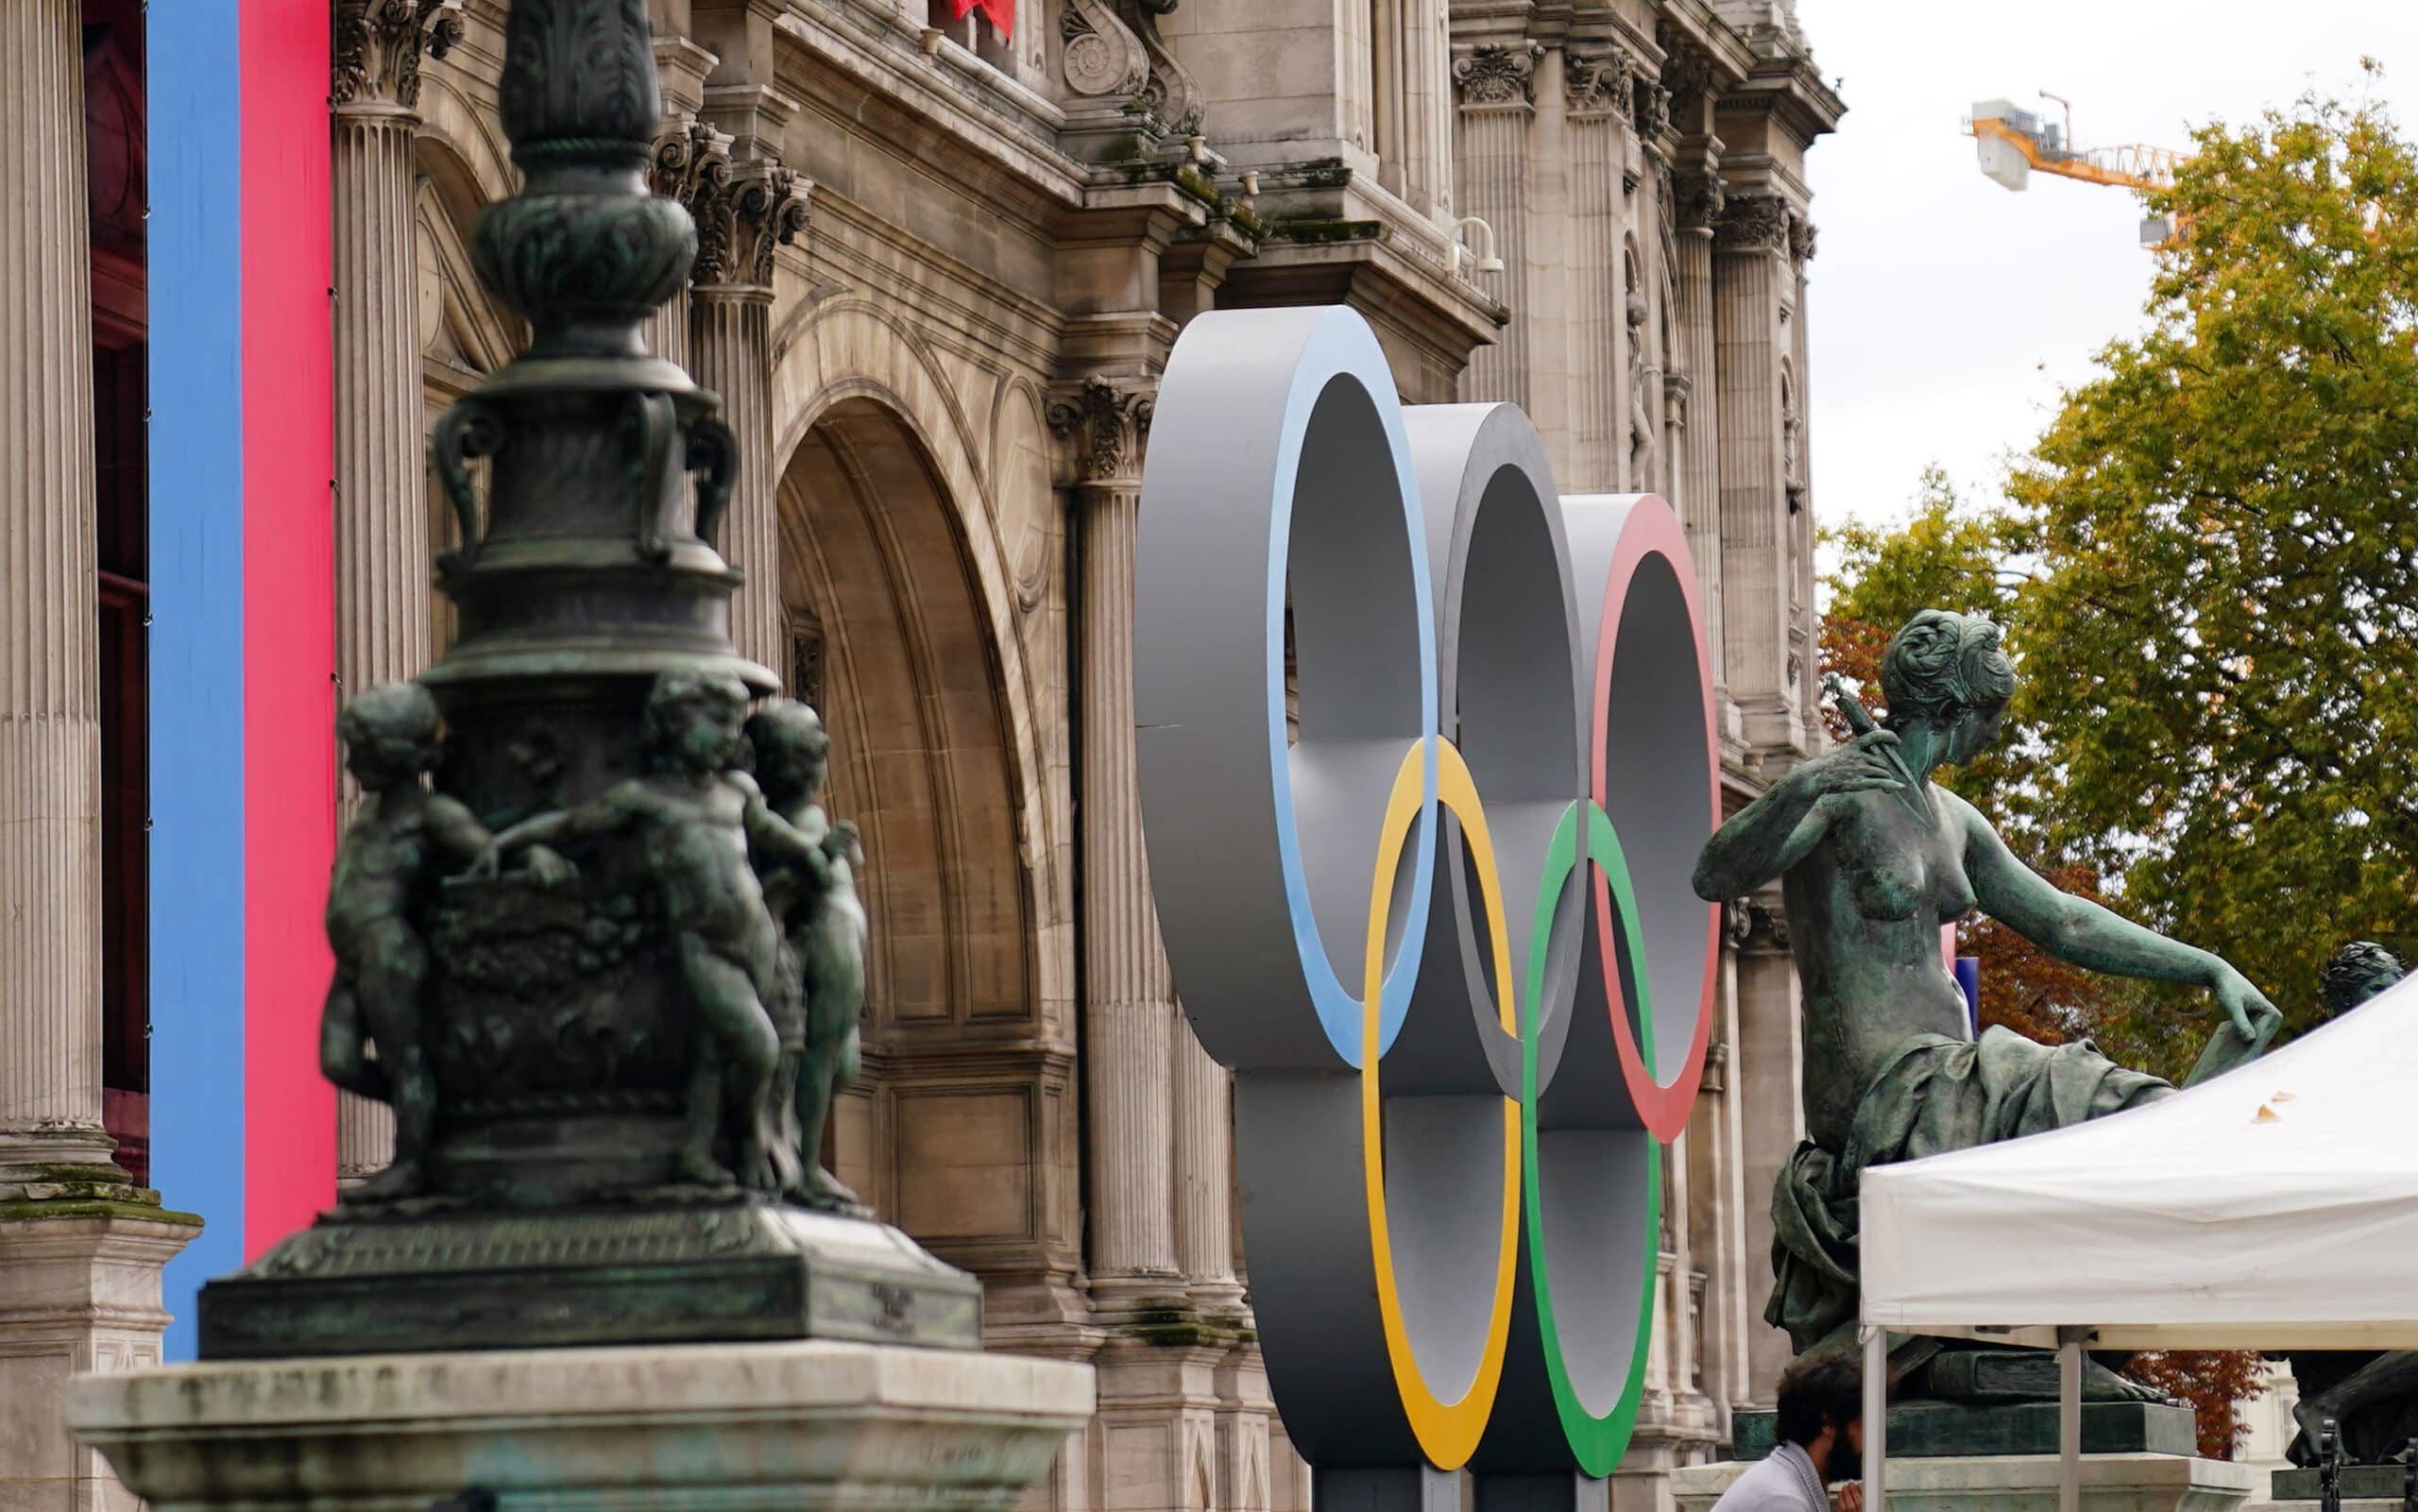 Peacock Plans To Stream All Paris 2024 Events Live